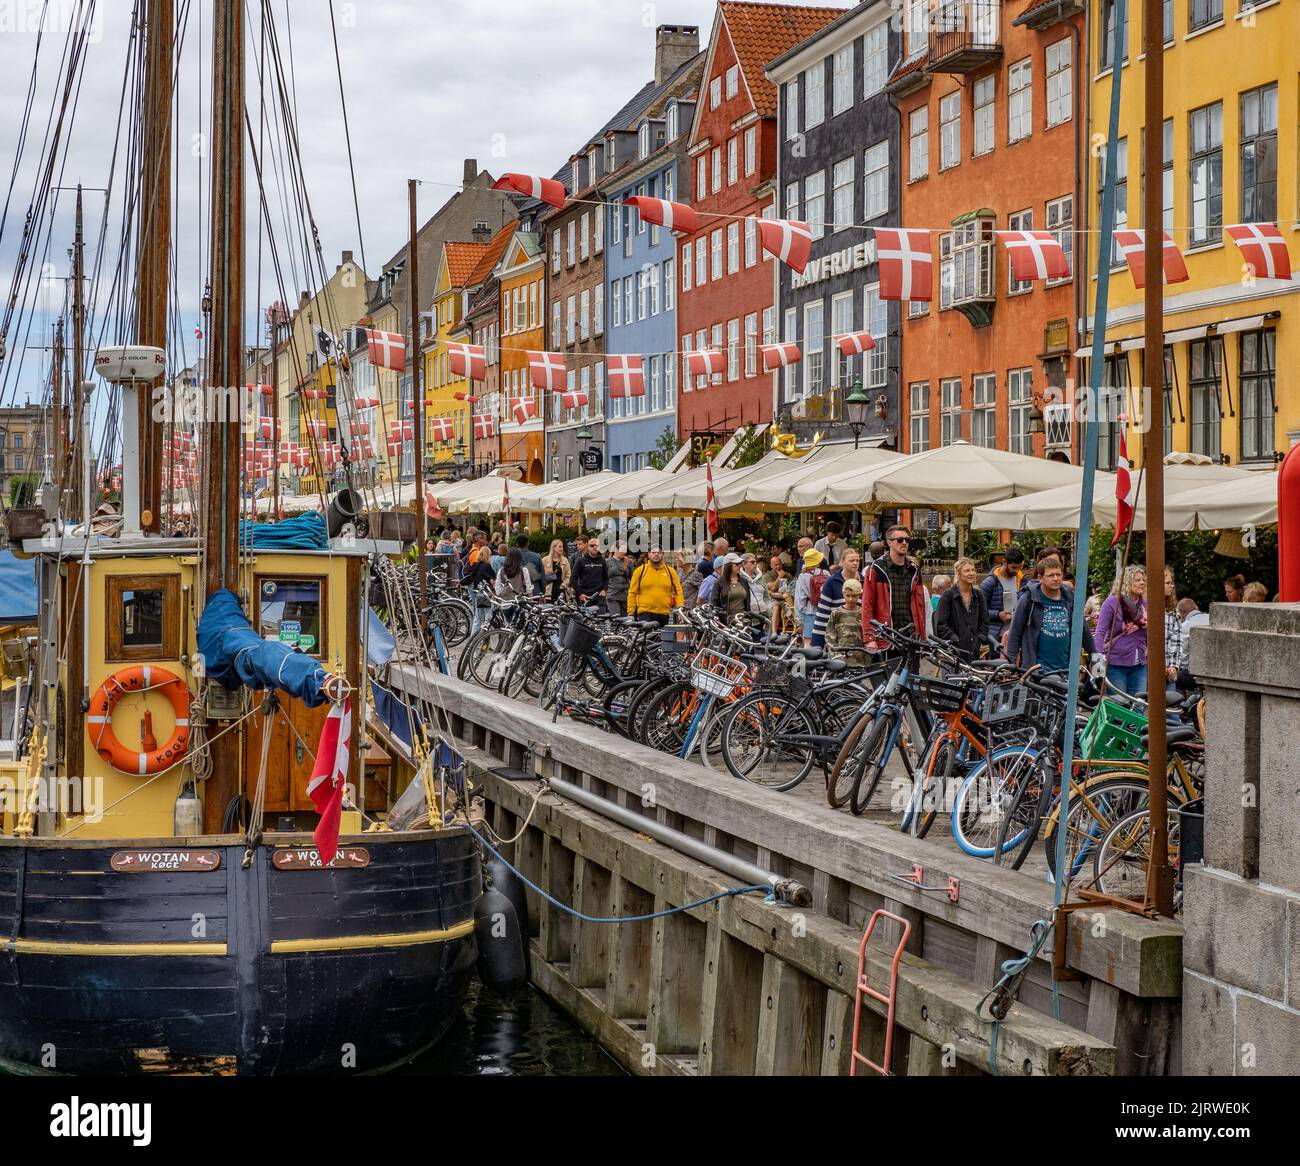 The popular tourist destination of Nyhavn an inlet of the sea lined with colourful 17th C houses cafes and bars and sailing boats - Copenhagen Denmark Stock Photo